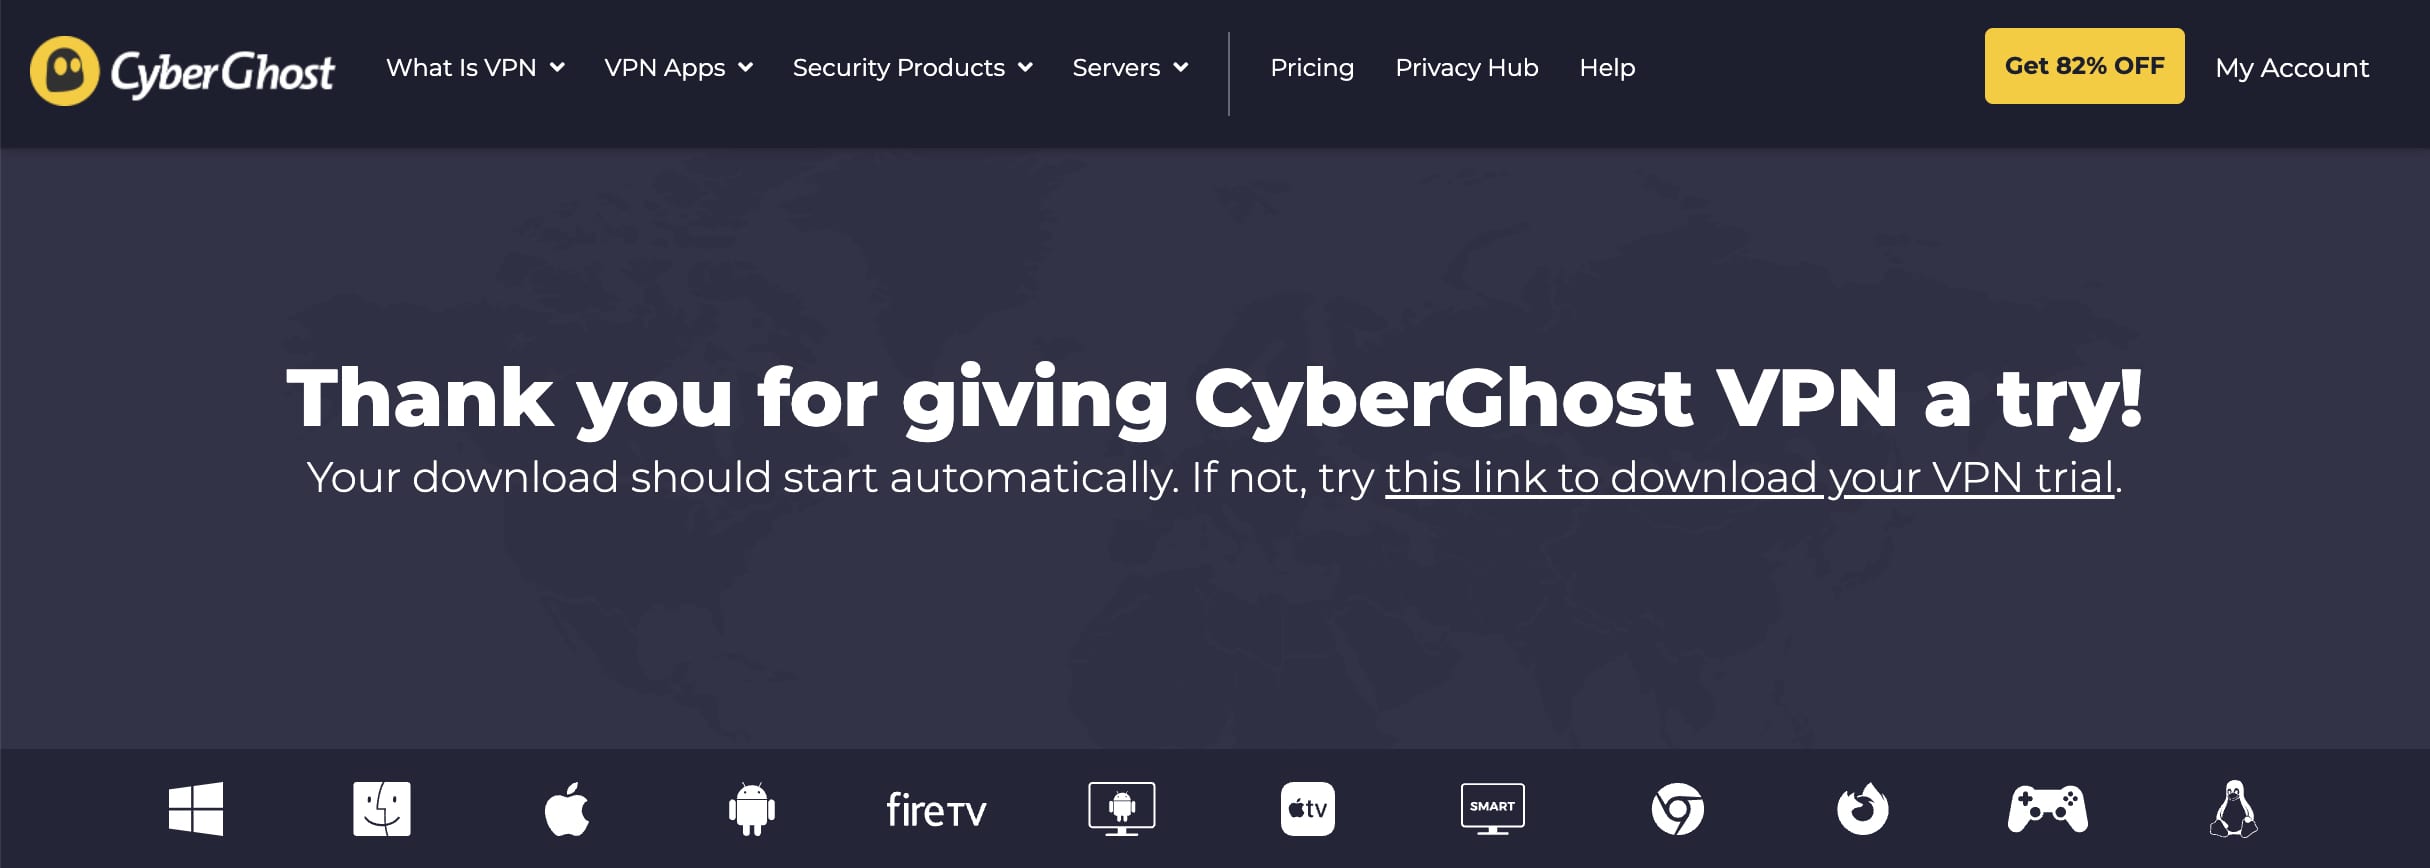 The CyberGhost website asking you to download the desktop app for a free trial